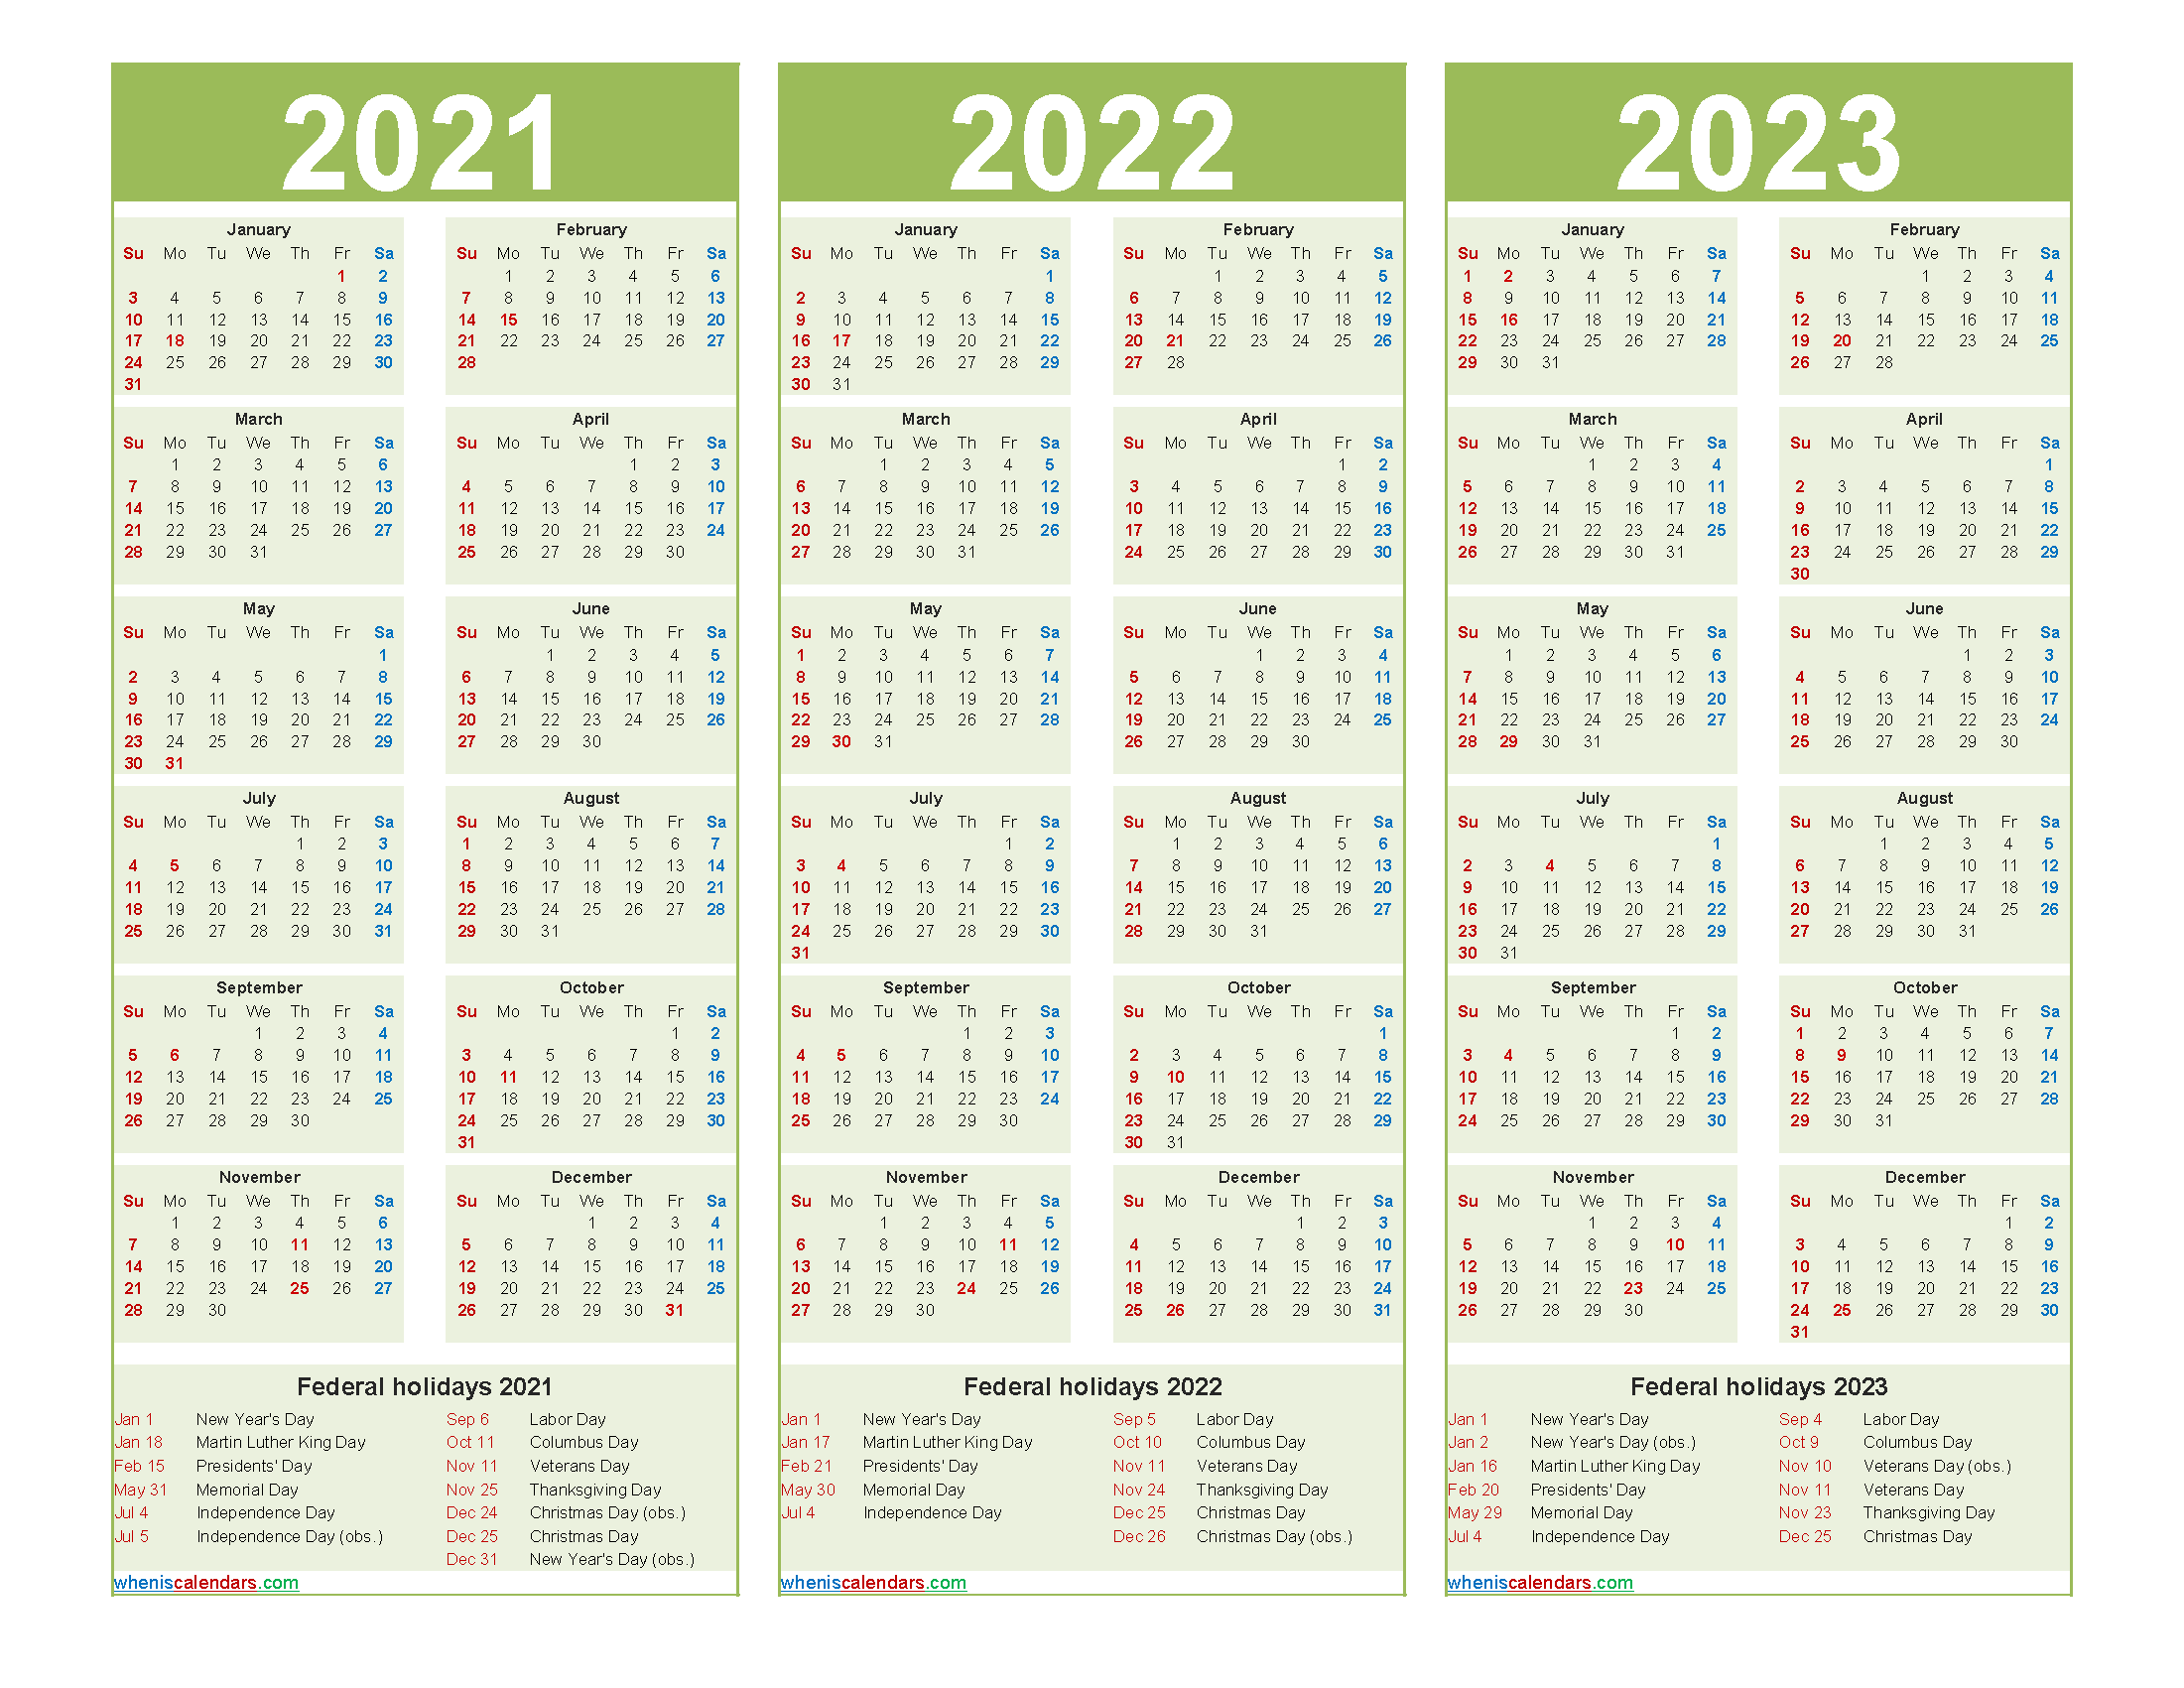 Ucsb 2022 2023 Calendar Free 2021 And 2022 And 2023 Calendar With Holidays